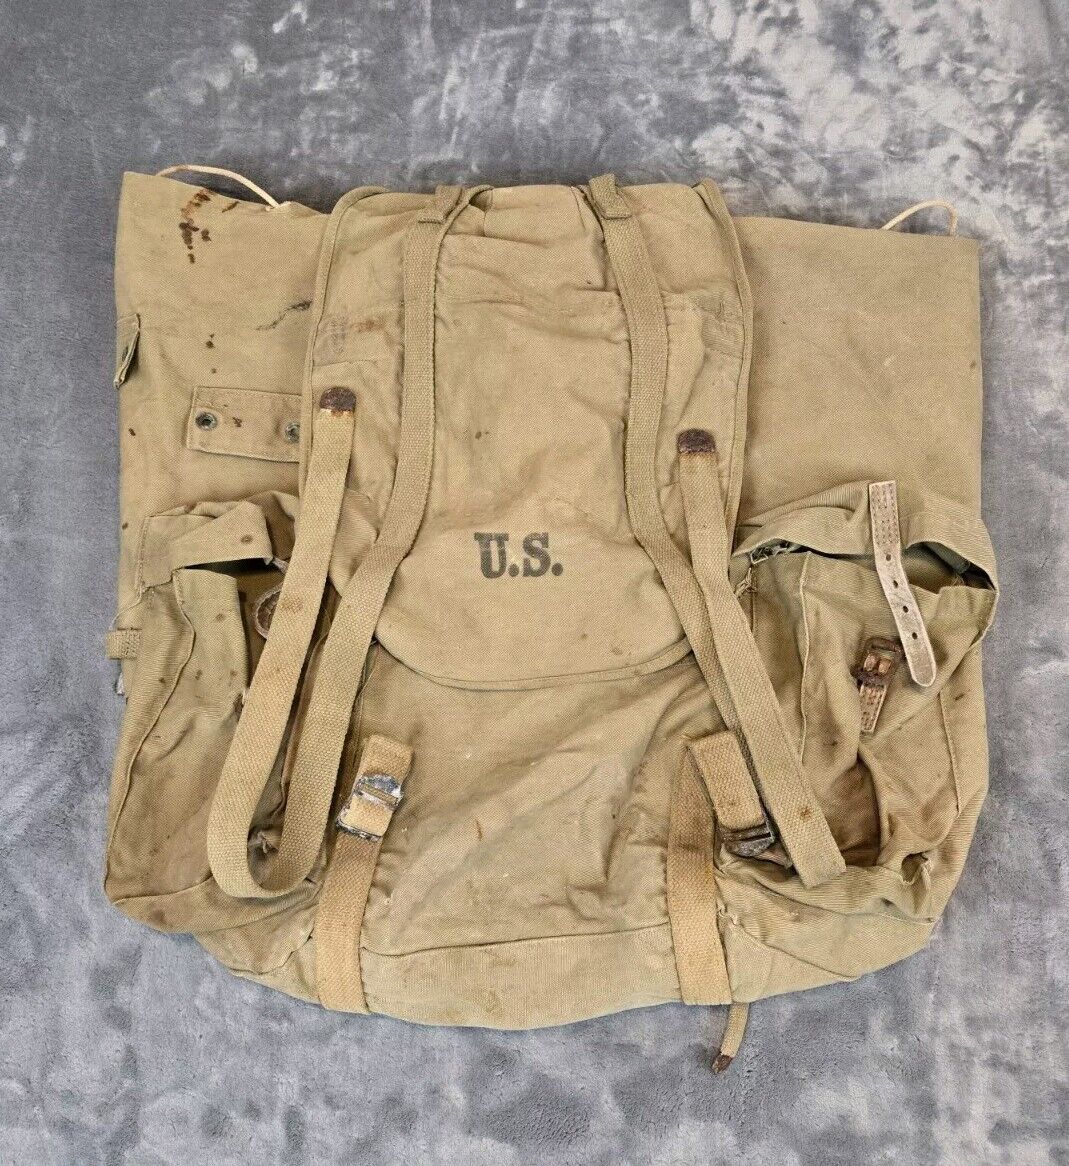 Vintage WW2 US Army Military Field Backpack Rucksack Canvas Bag With Frame 1942